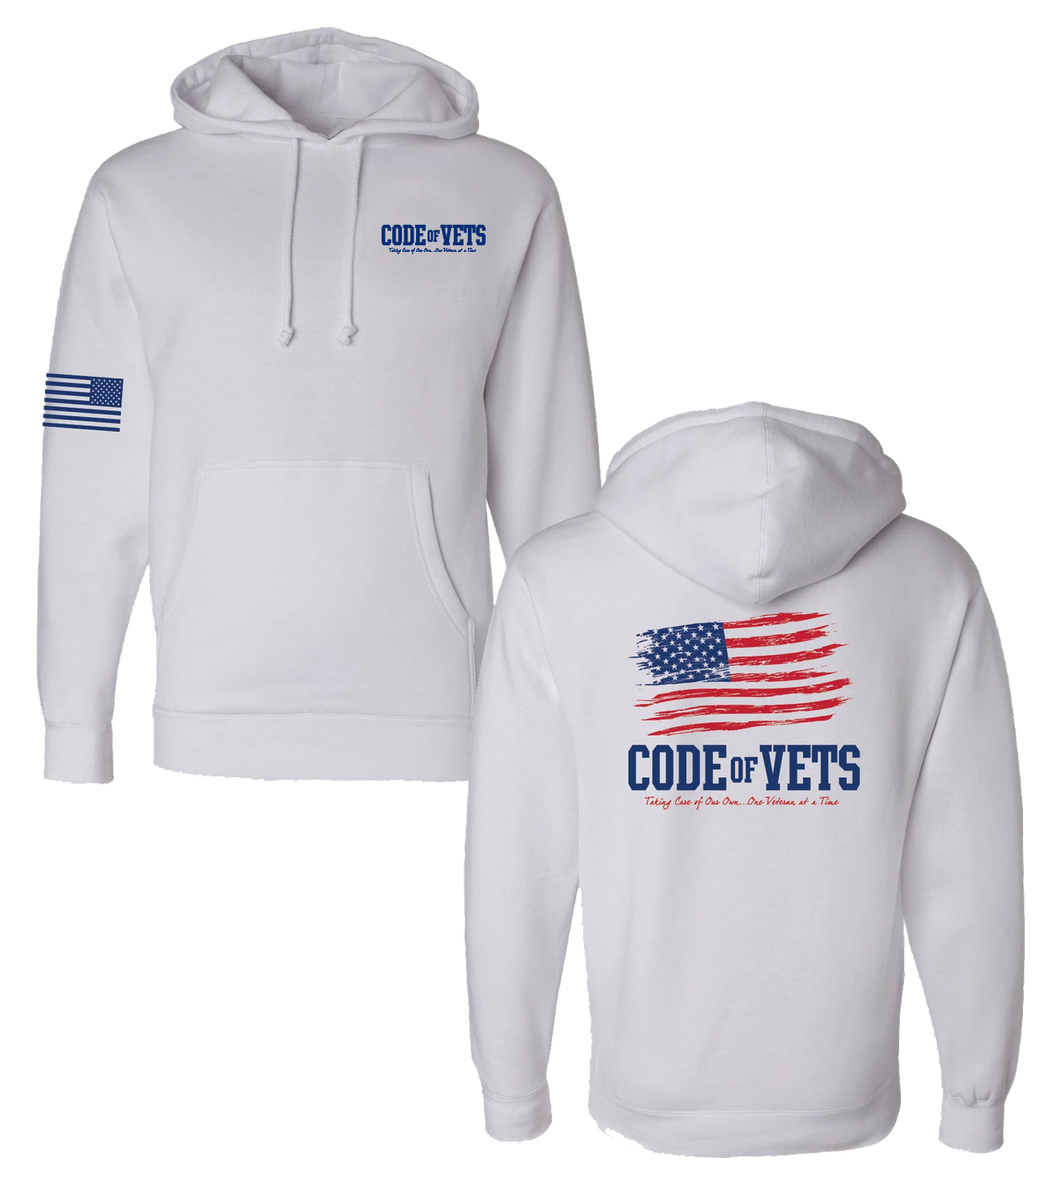 Code of Vets - Hoodie - White (Lightweight) Fitted